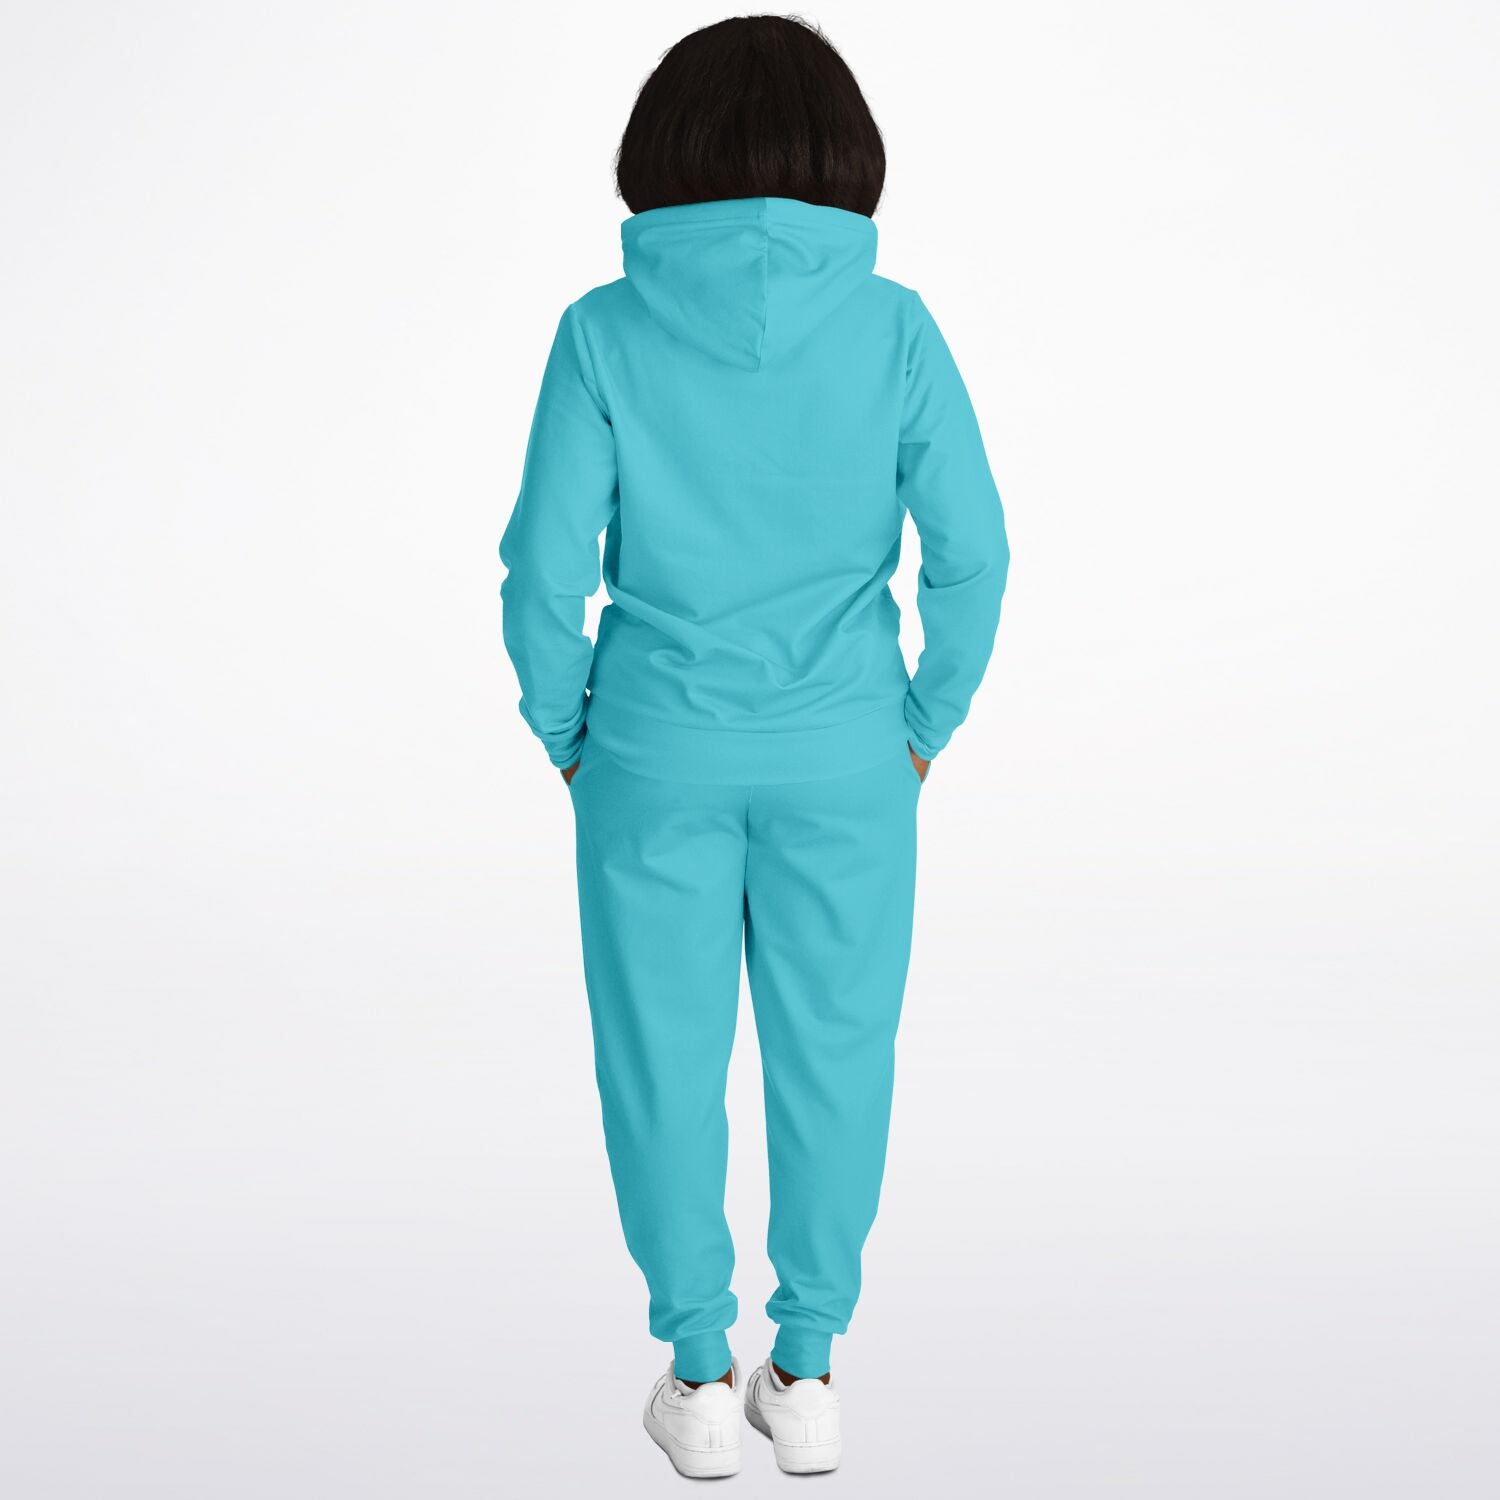 Ocean Blue Women's Hoodie and Jogger Set - Sport Finesse